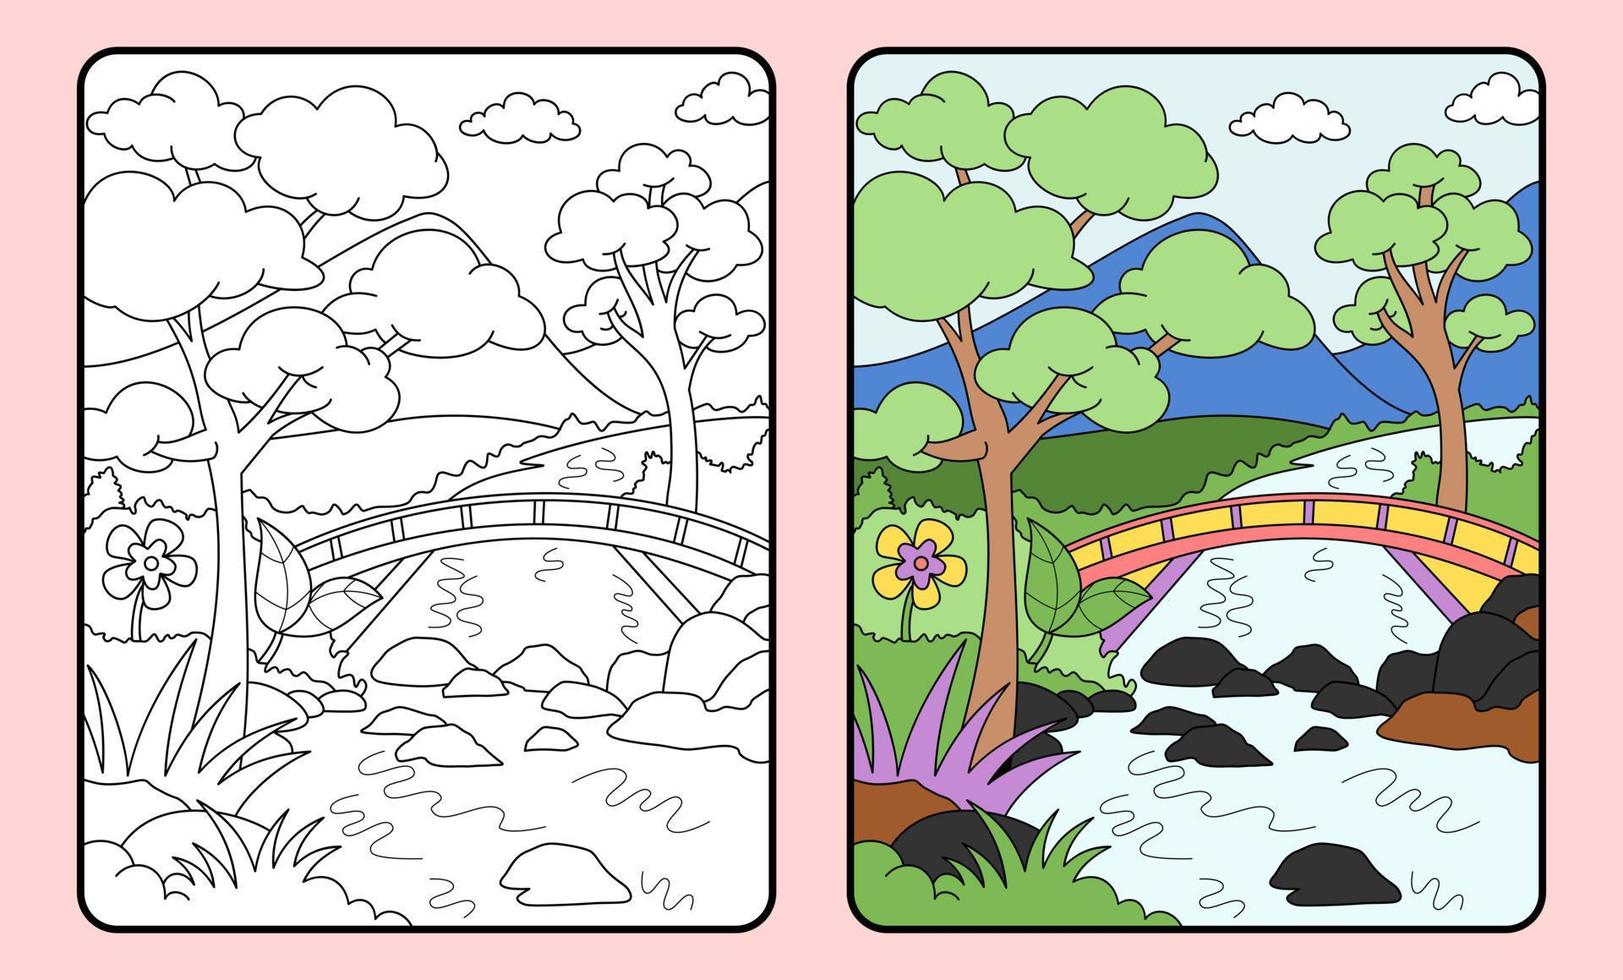 learn coloring for kids and elementary school. Mountains and rivers, bridges. vector